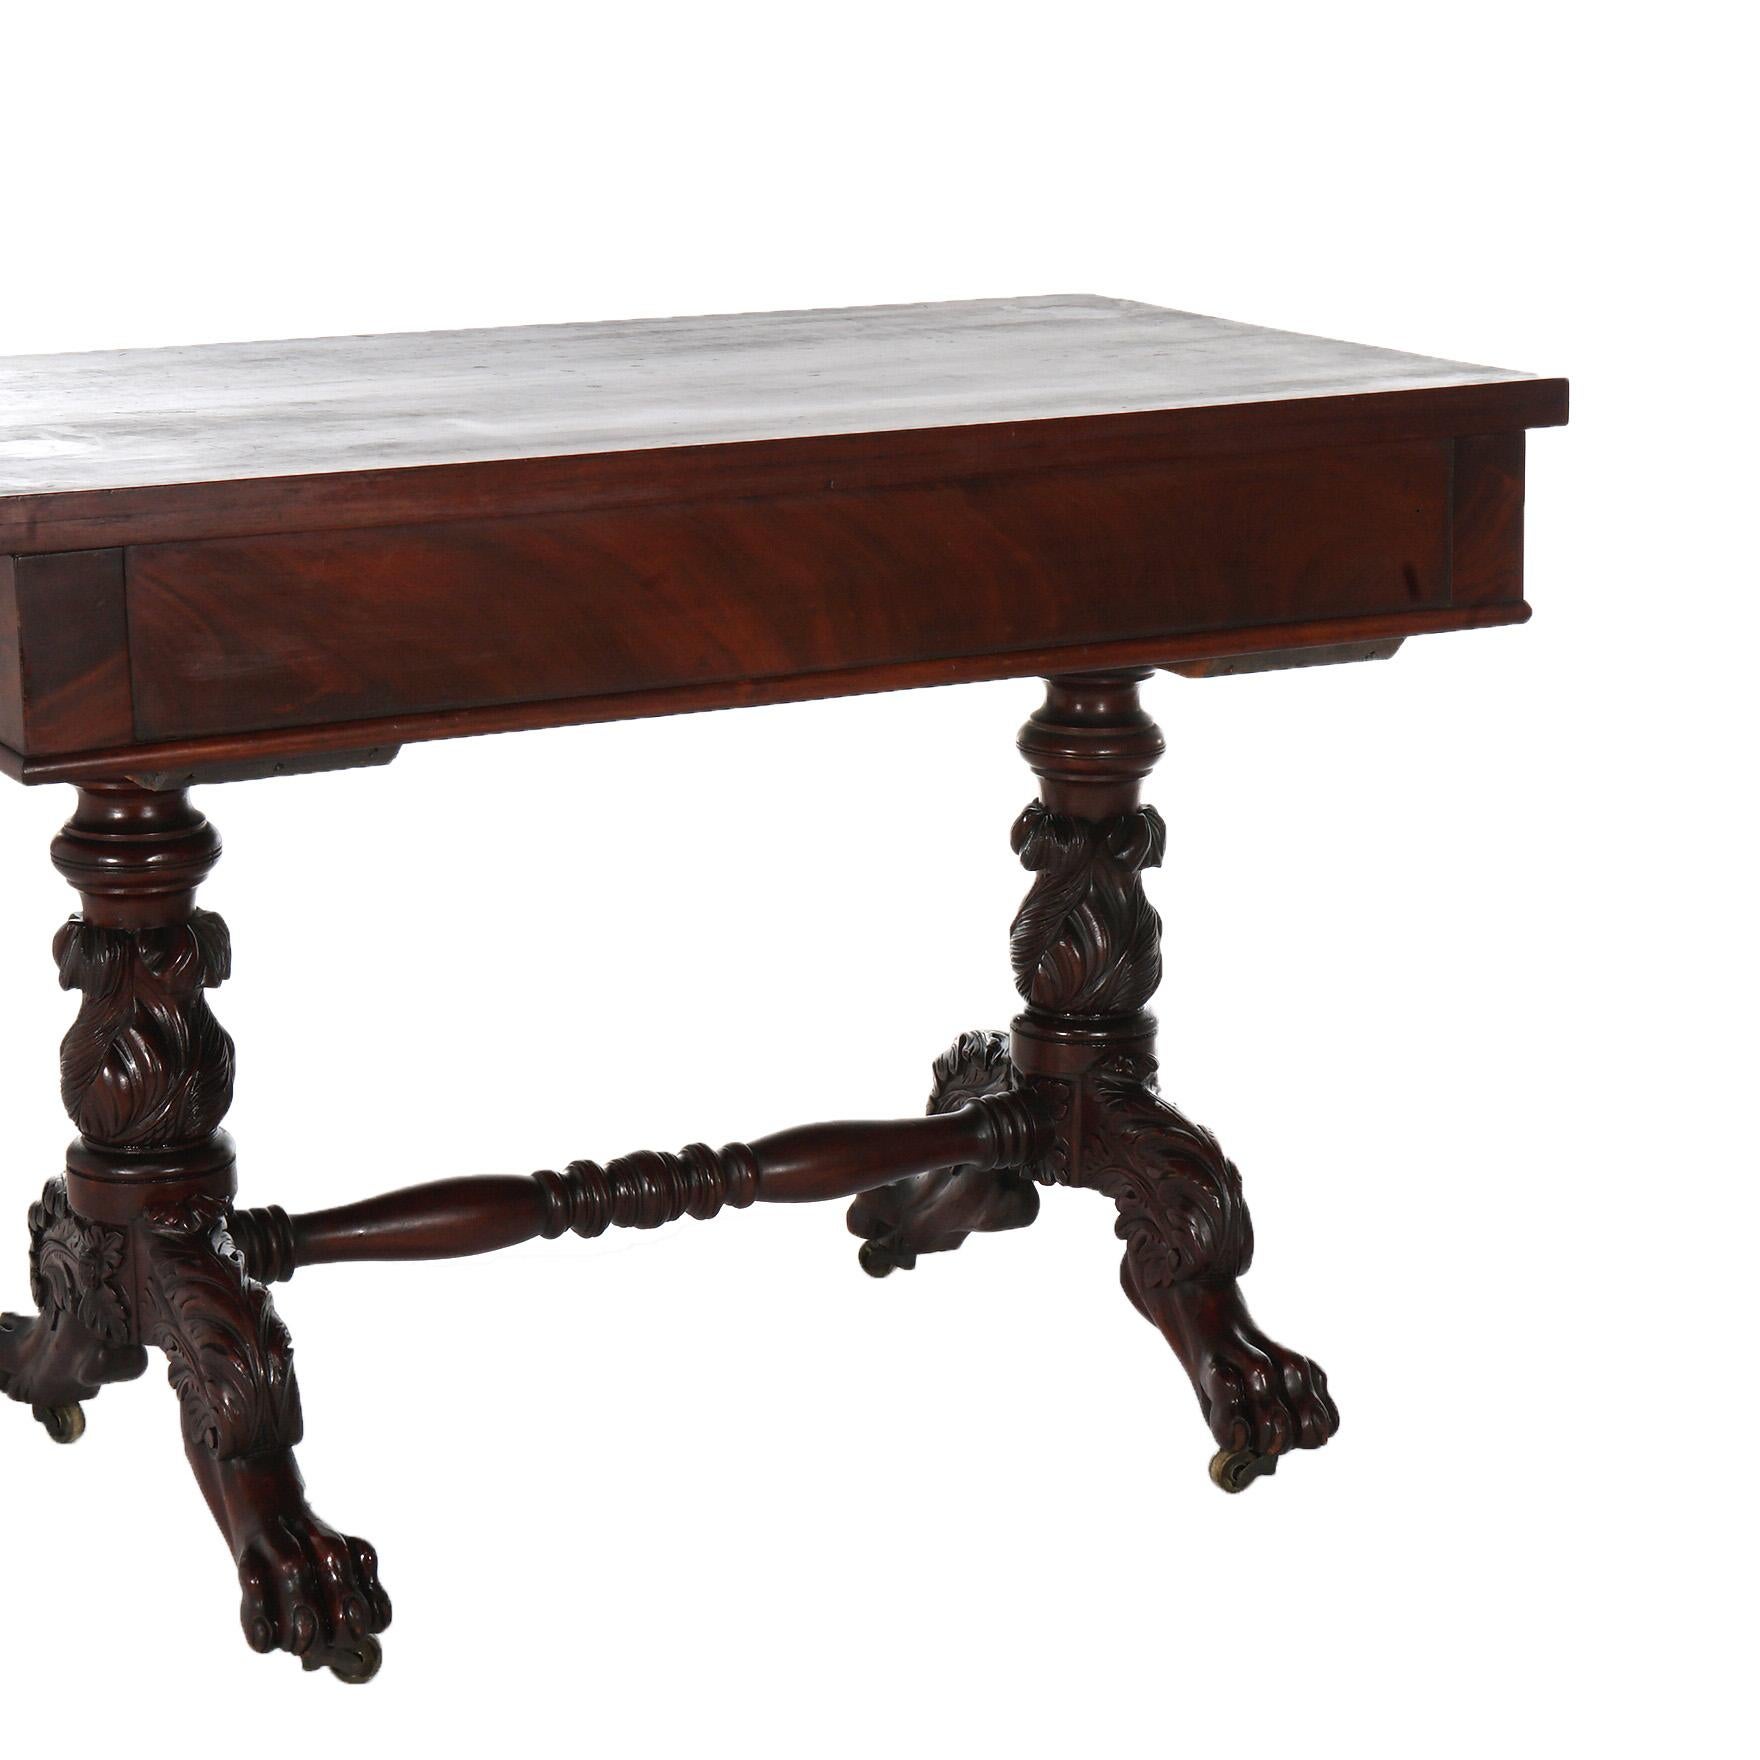 Antique American Empire Flame Mahogany Sofa Table, Carved Acanthus & Paws, C1840 For Sale 3